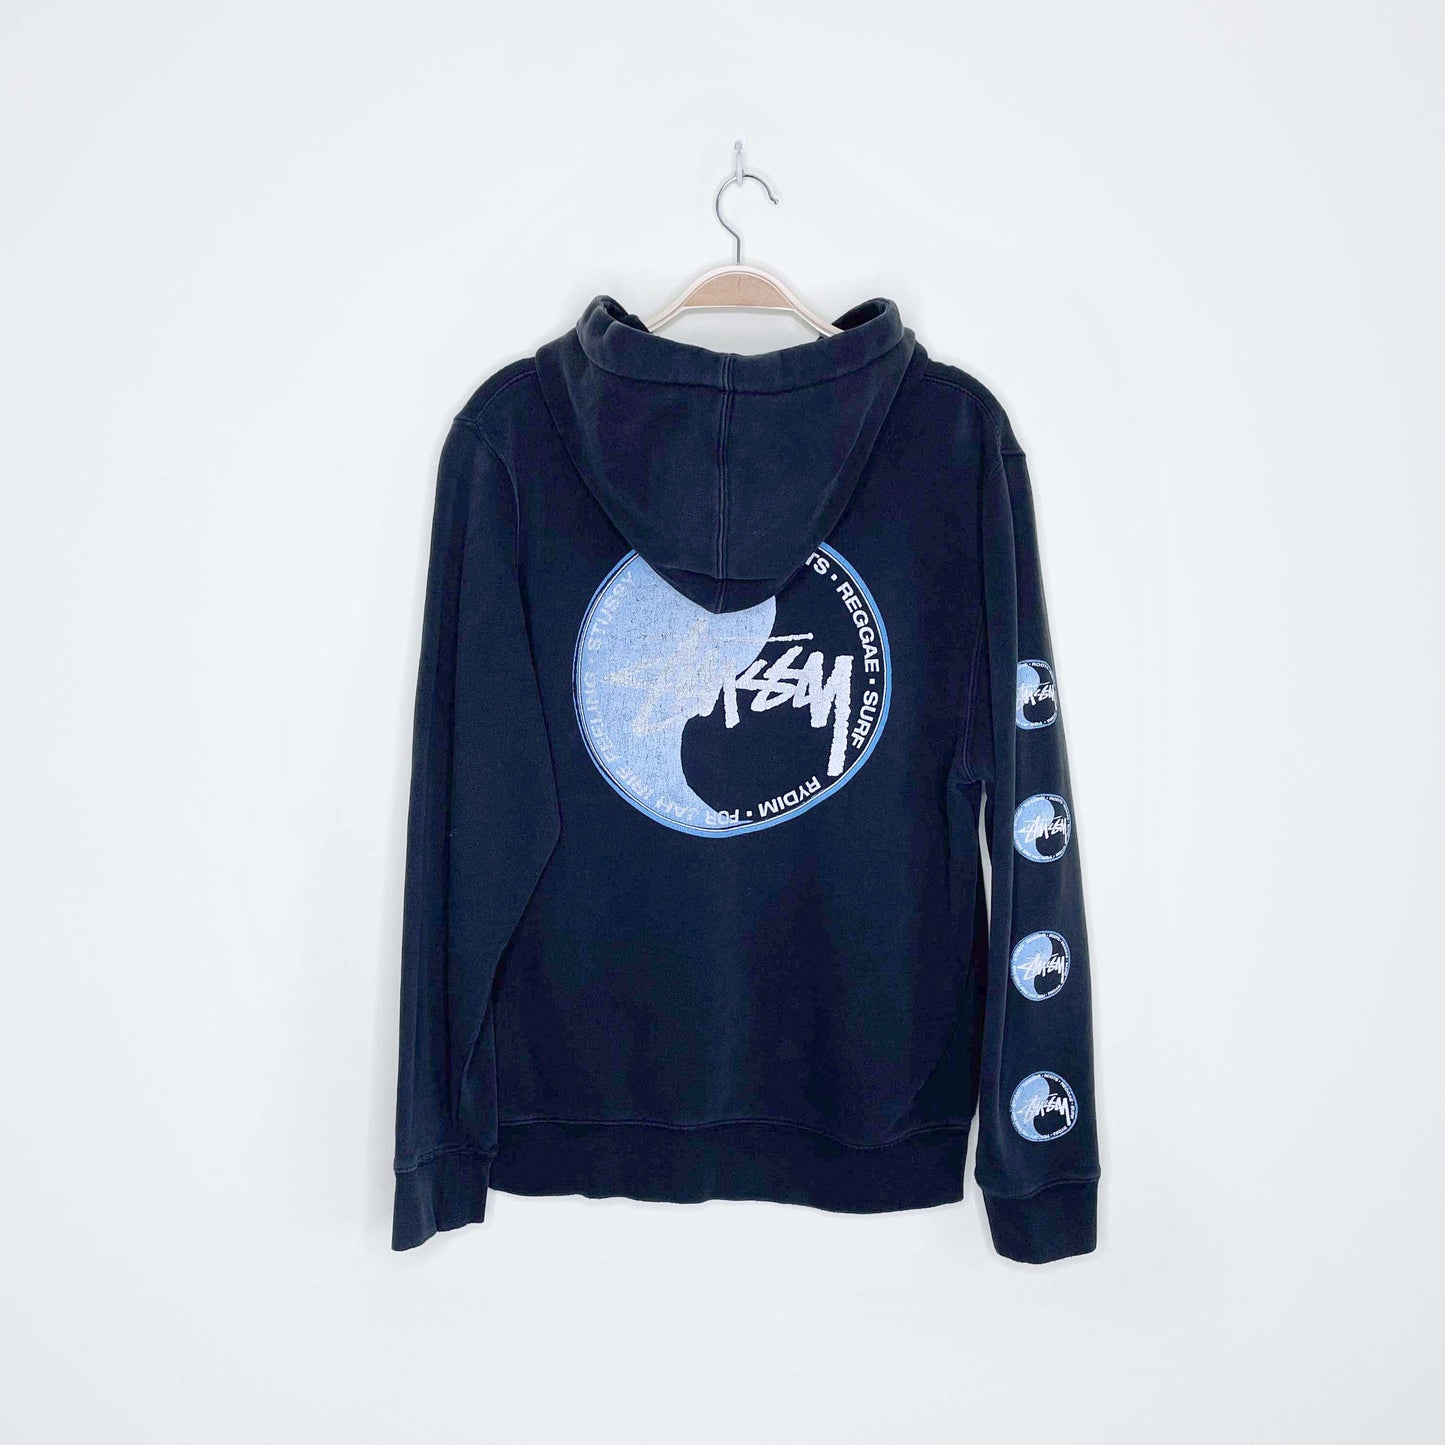 vintage stussy yin yang hoodie made in usa - size small